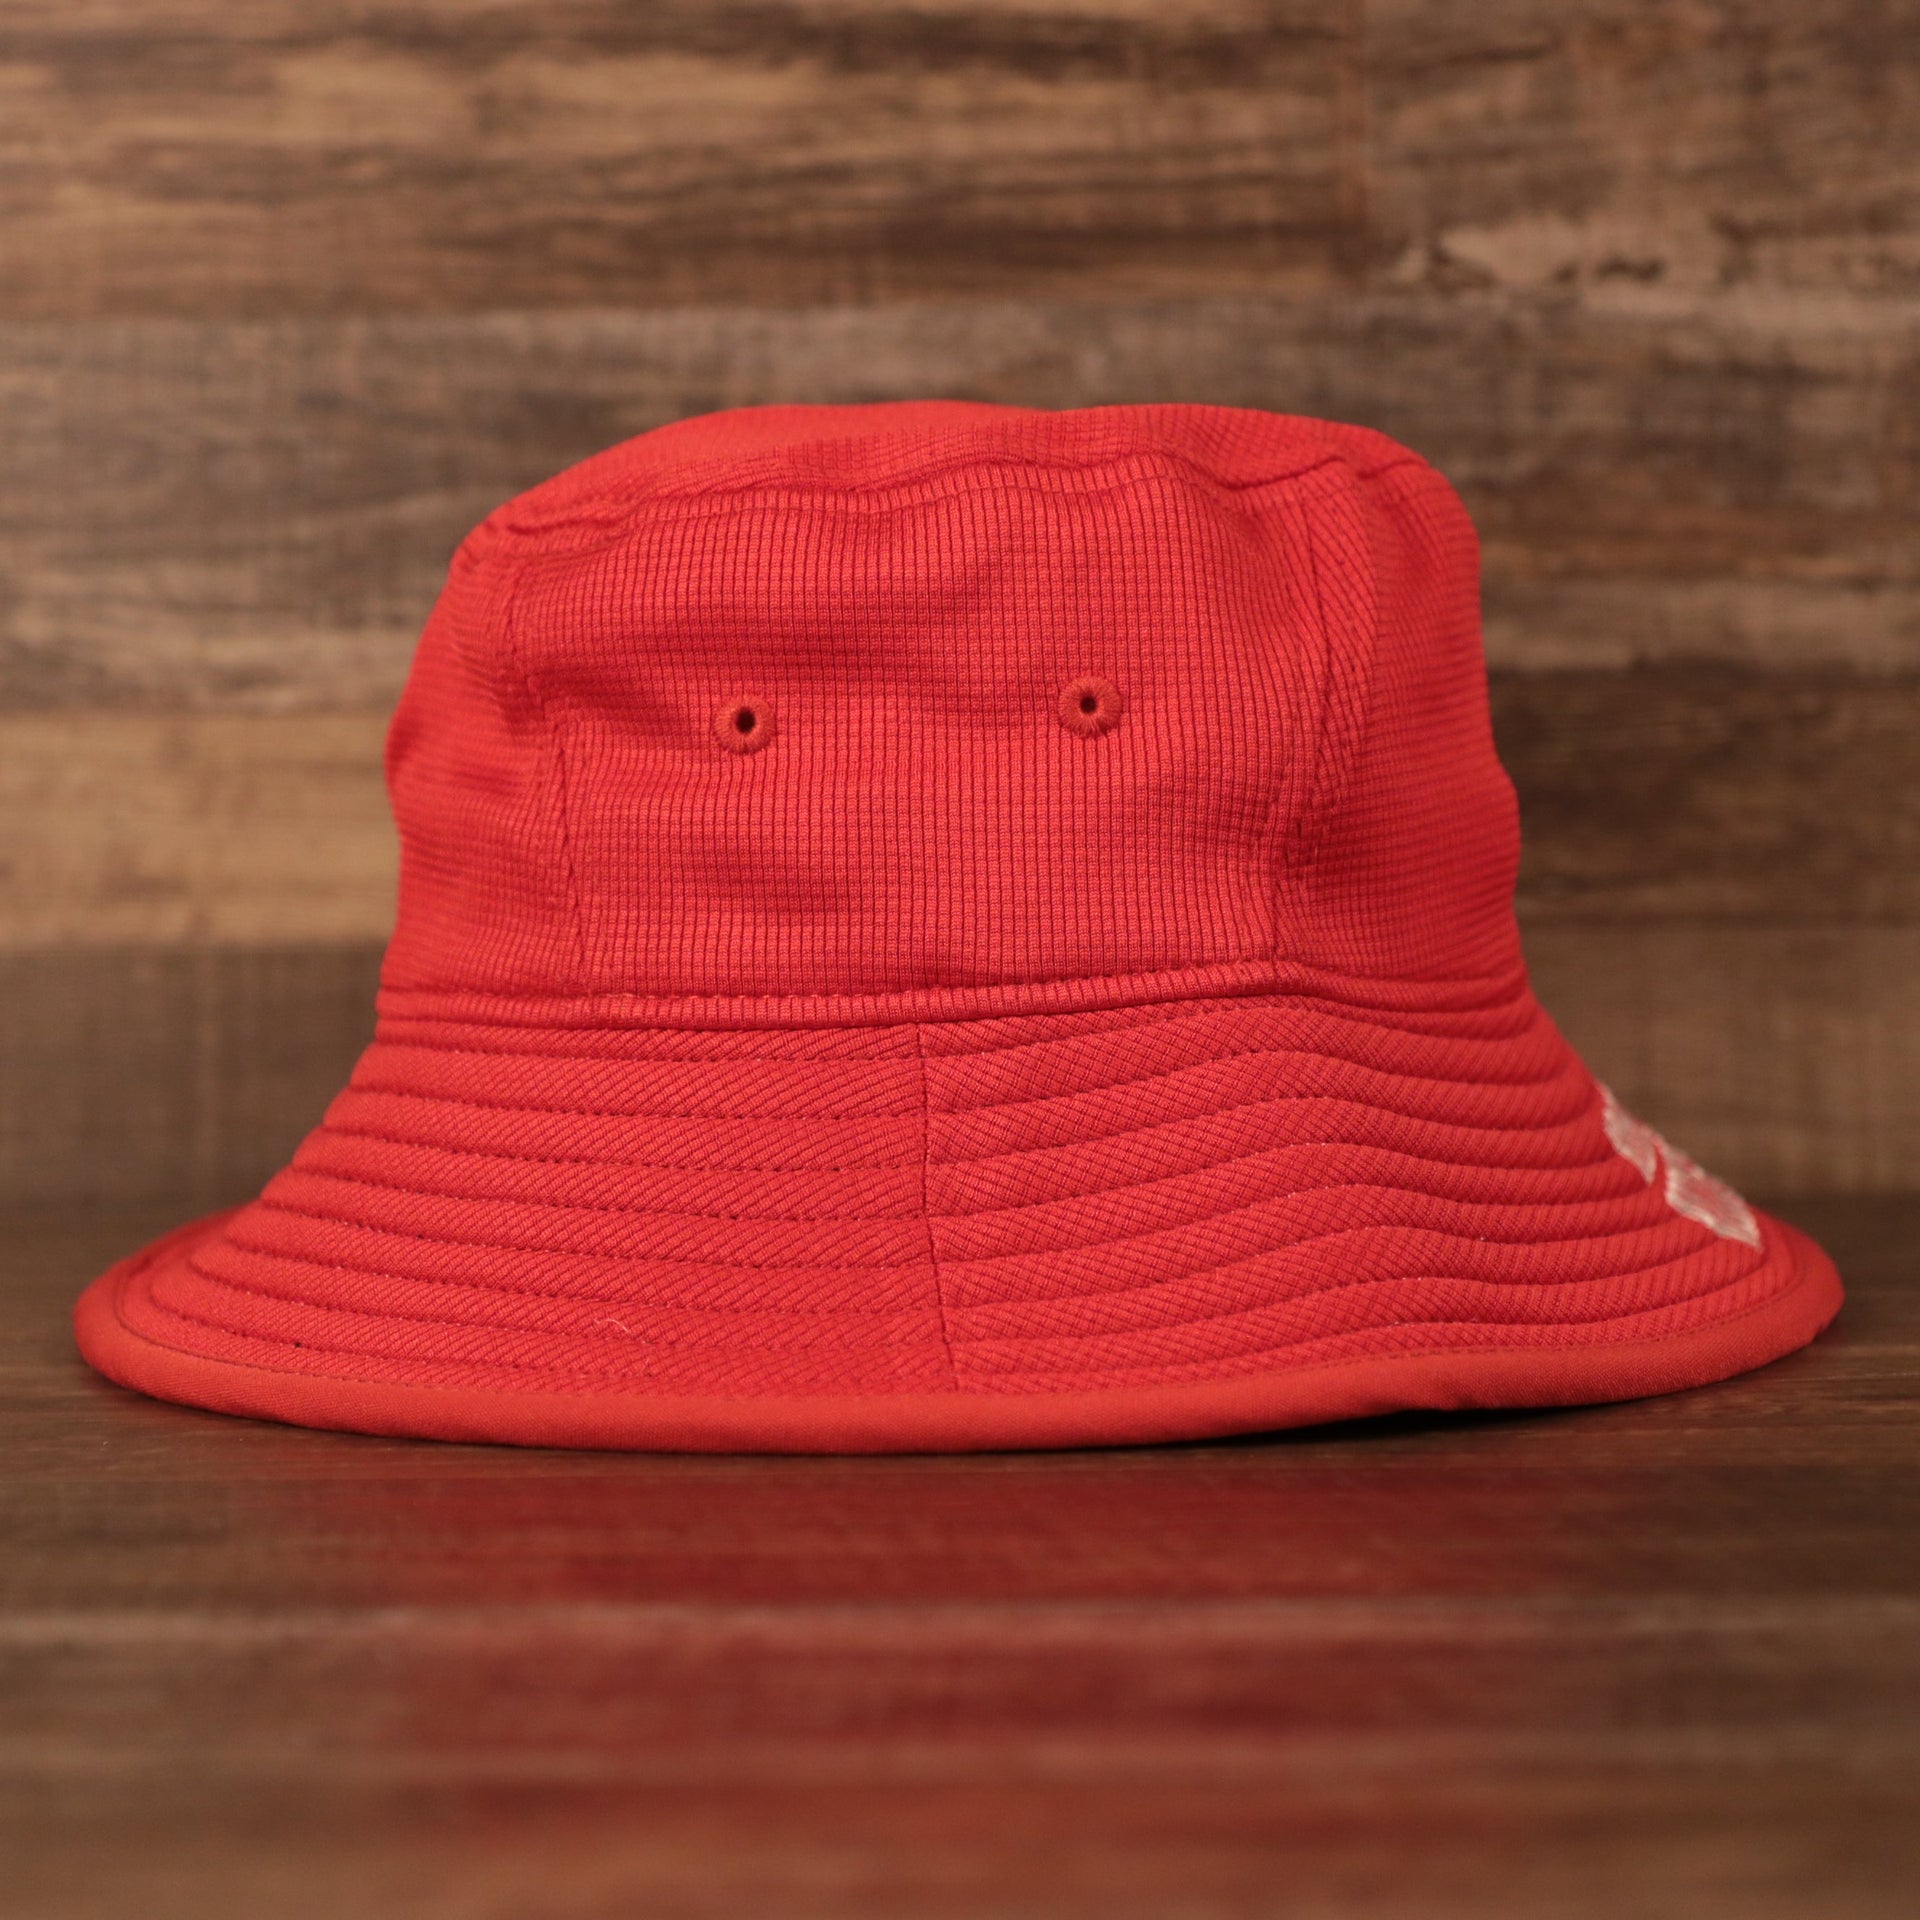 The Houston Rockets red boonie hat by New Era.